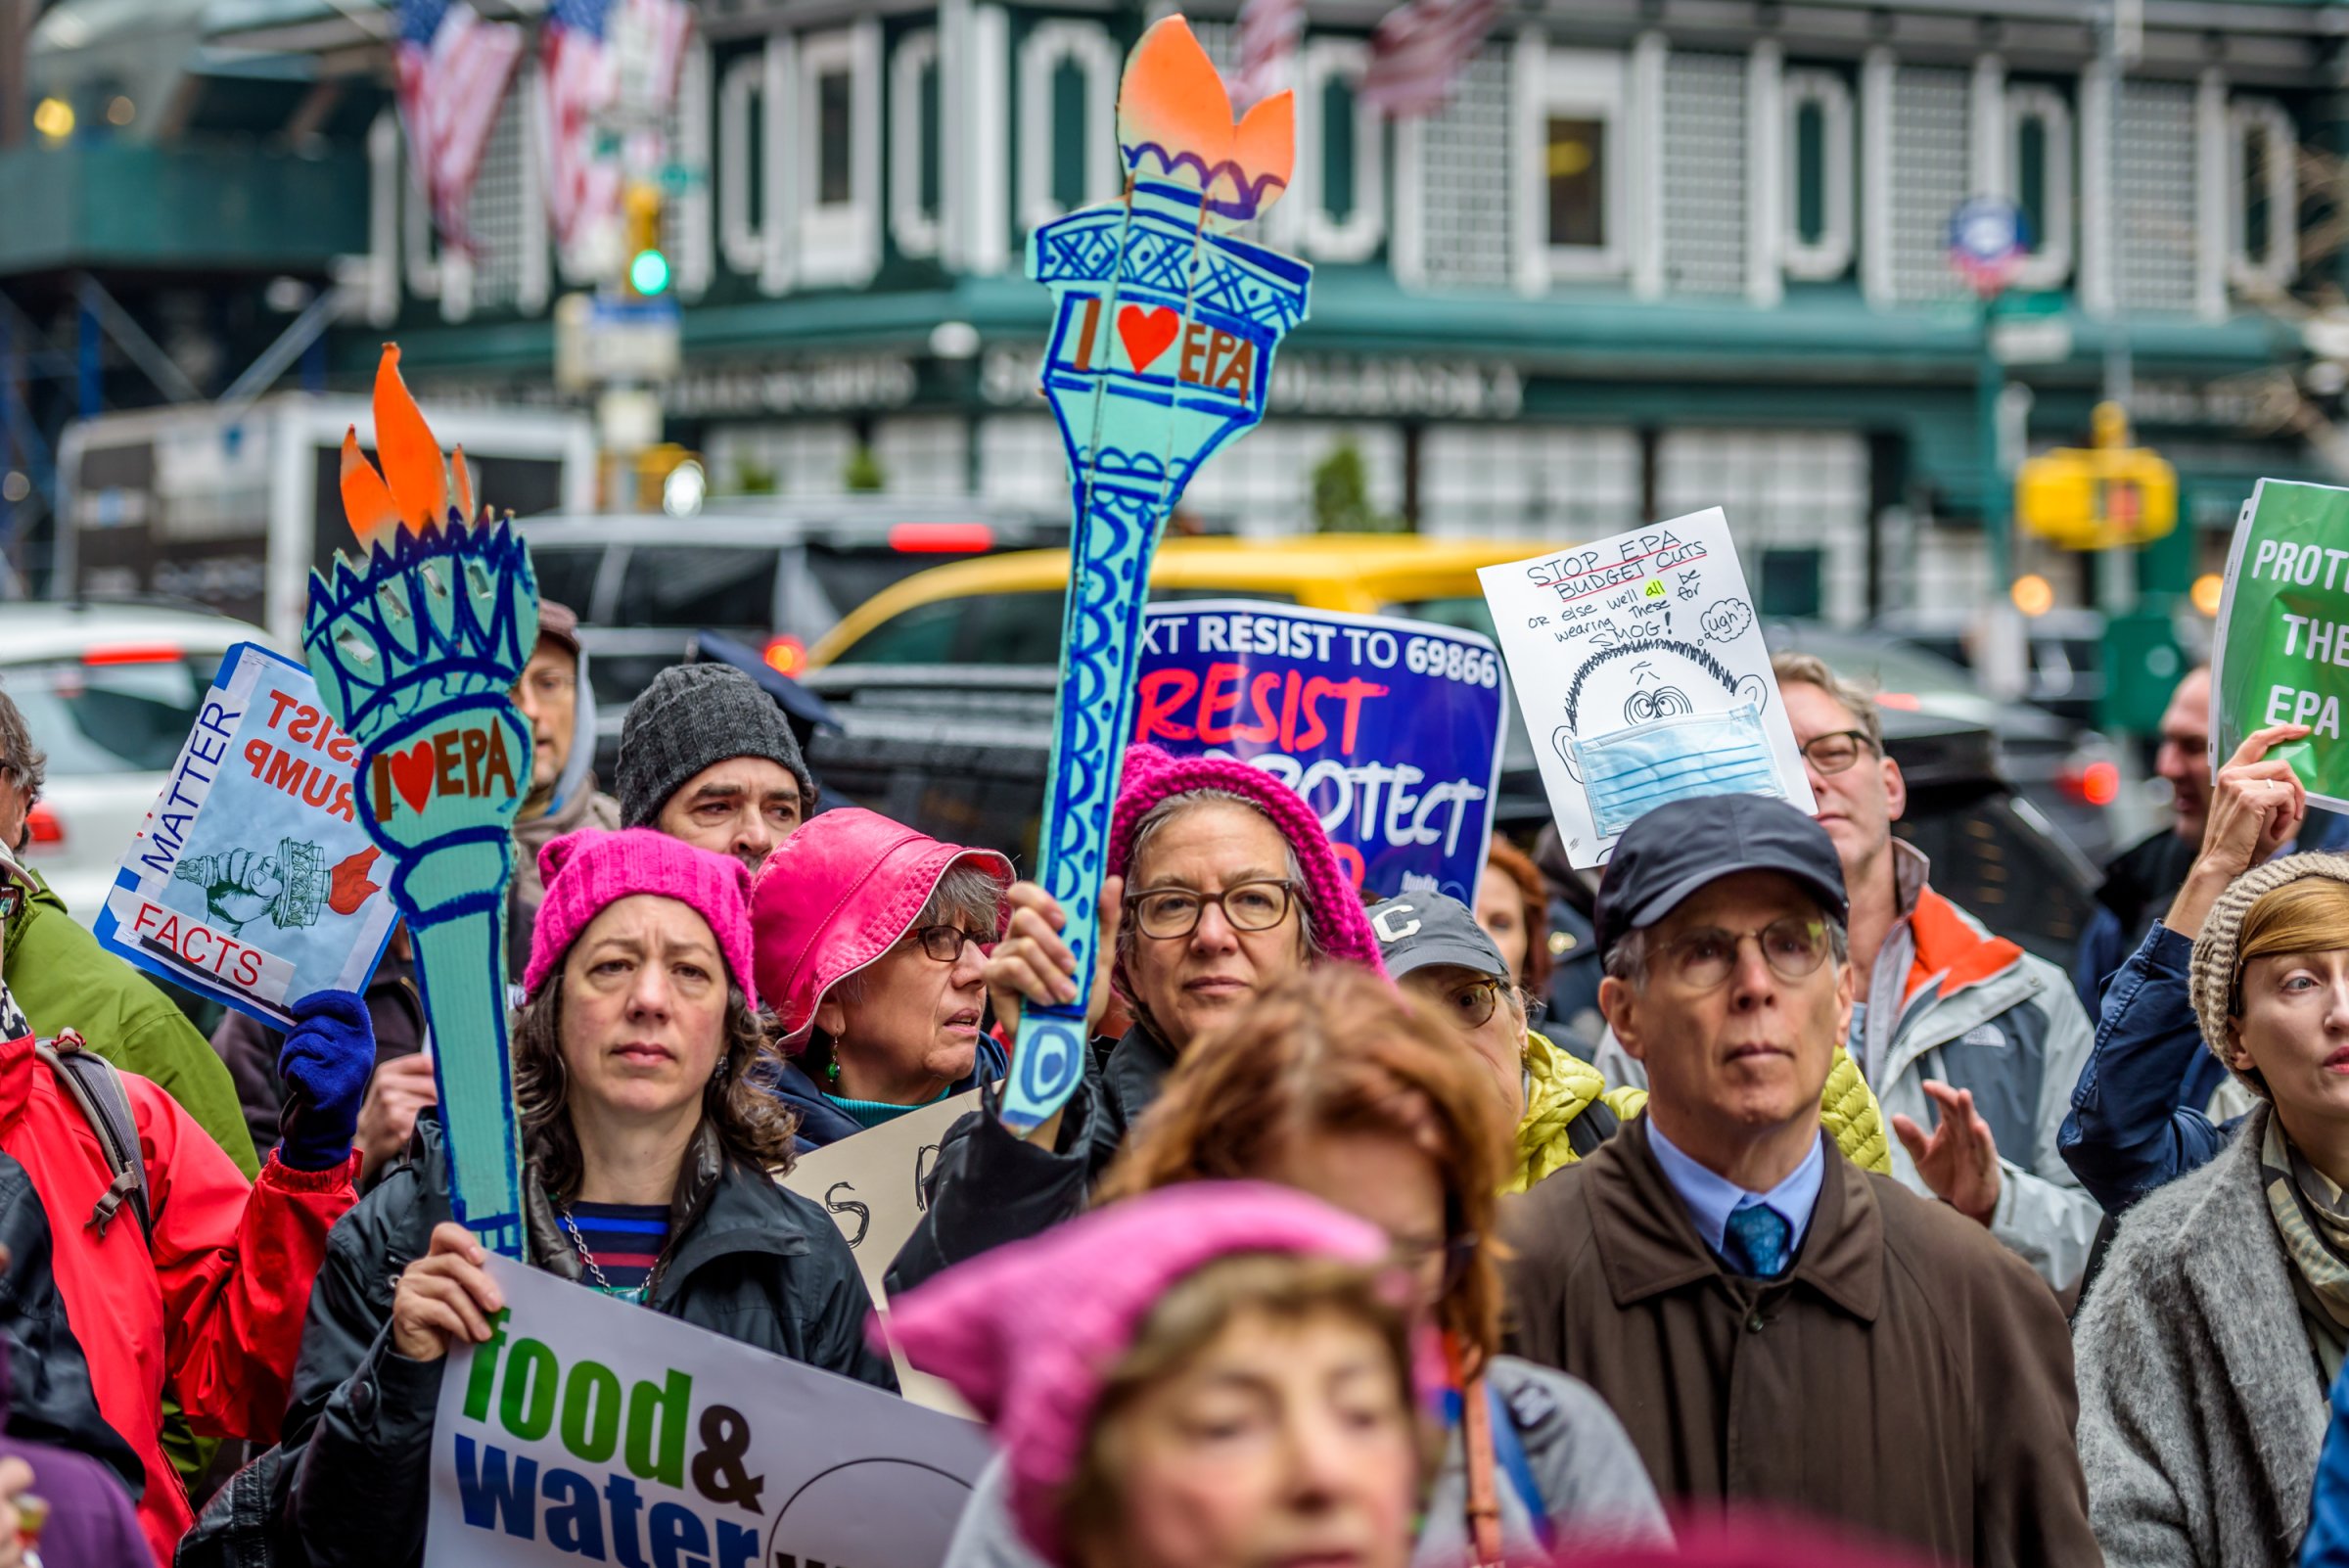 New York based Climate Activist Groups held a rally on April